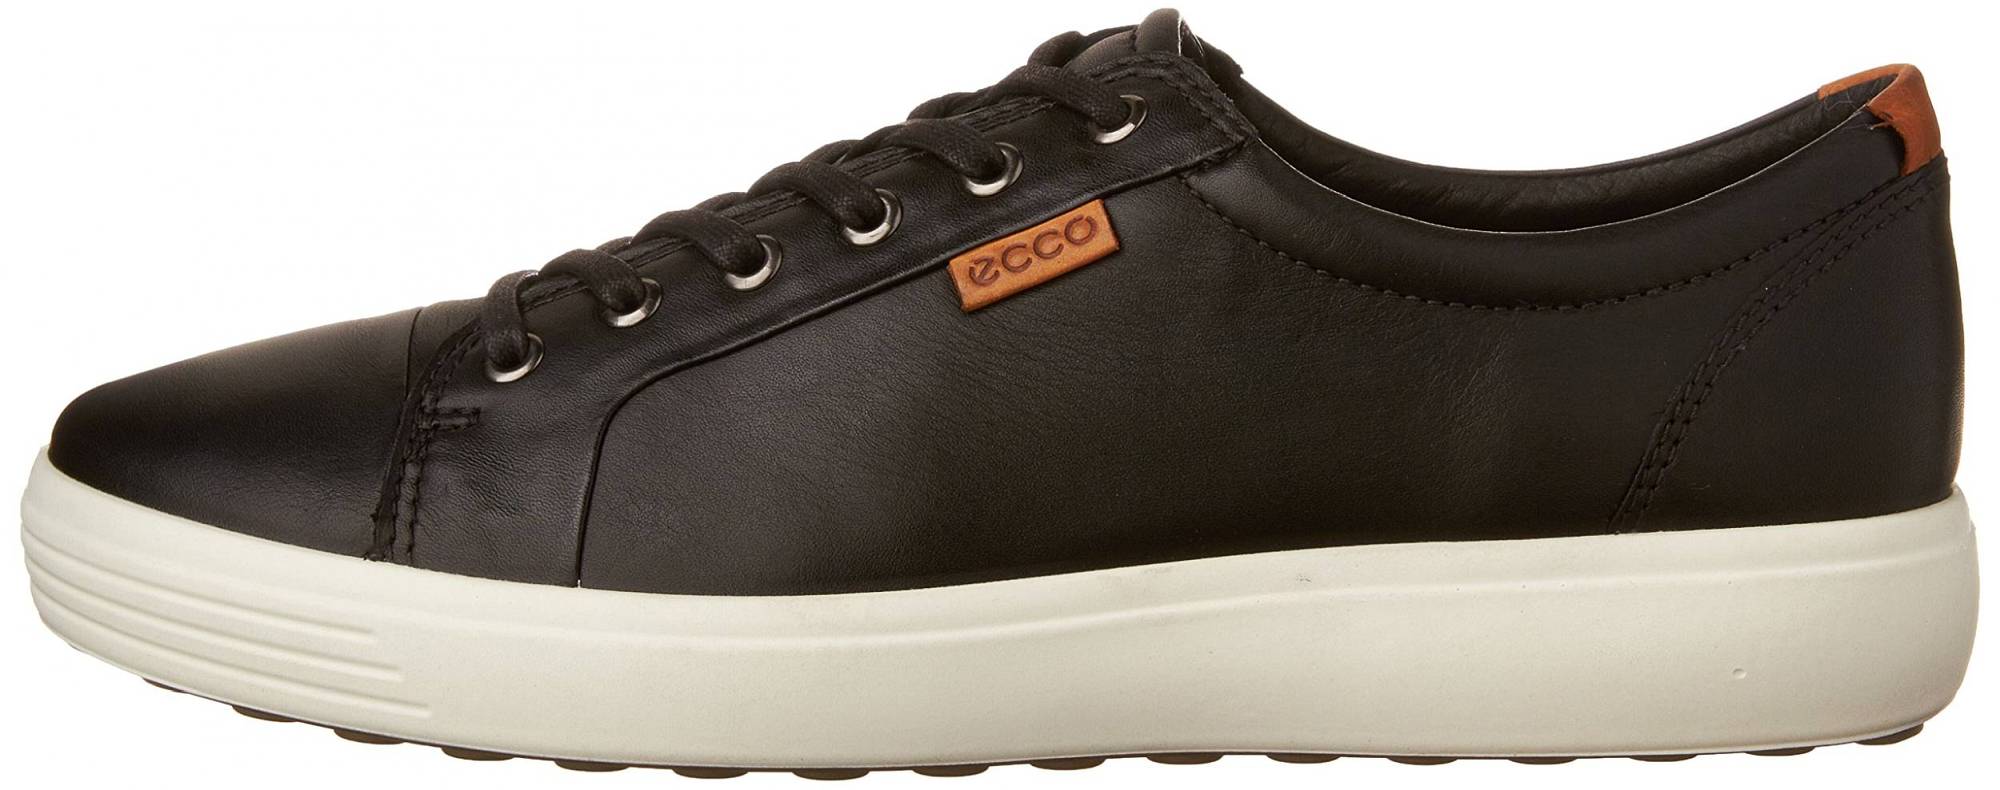 Ecco Soft 7 Sneaker – Shoes Reviews & Reasons To Buy